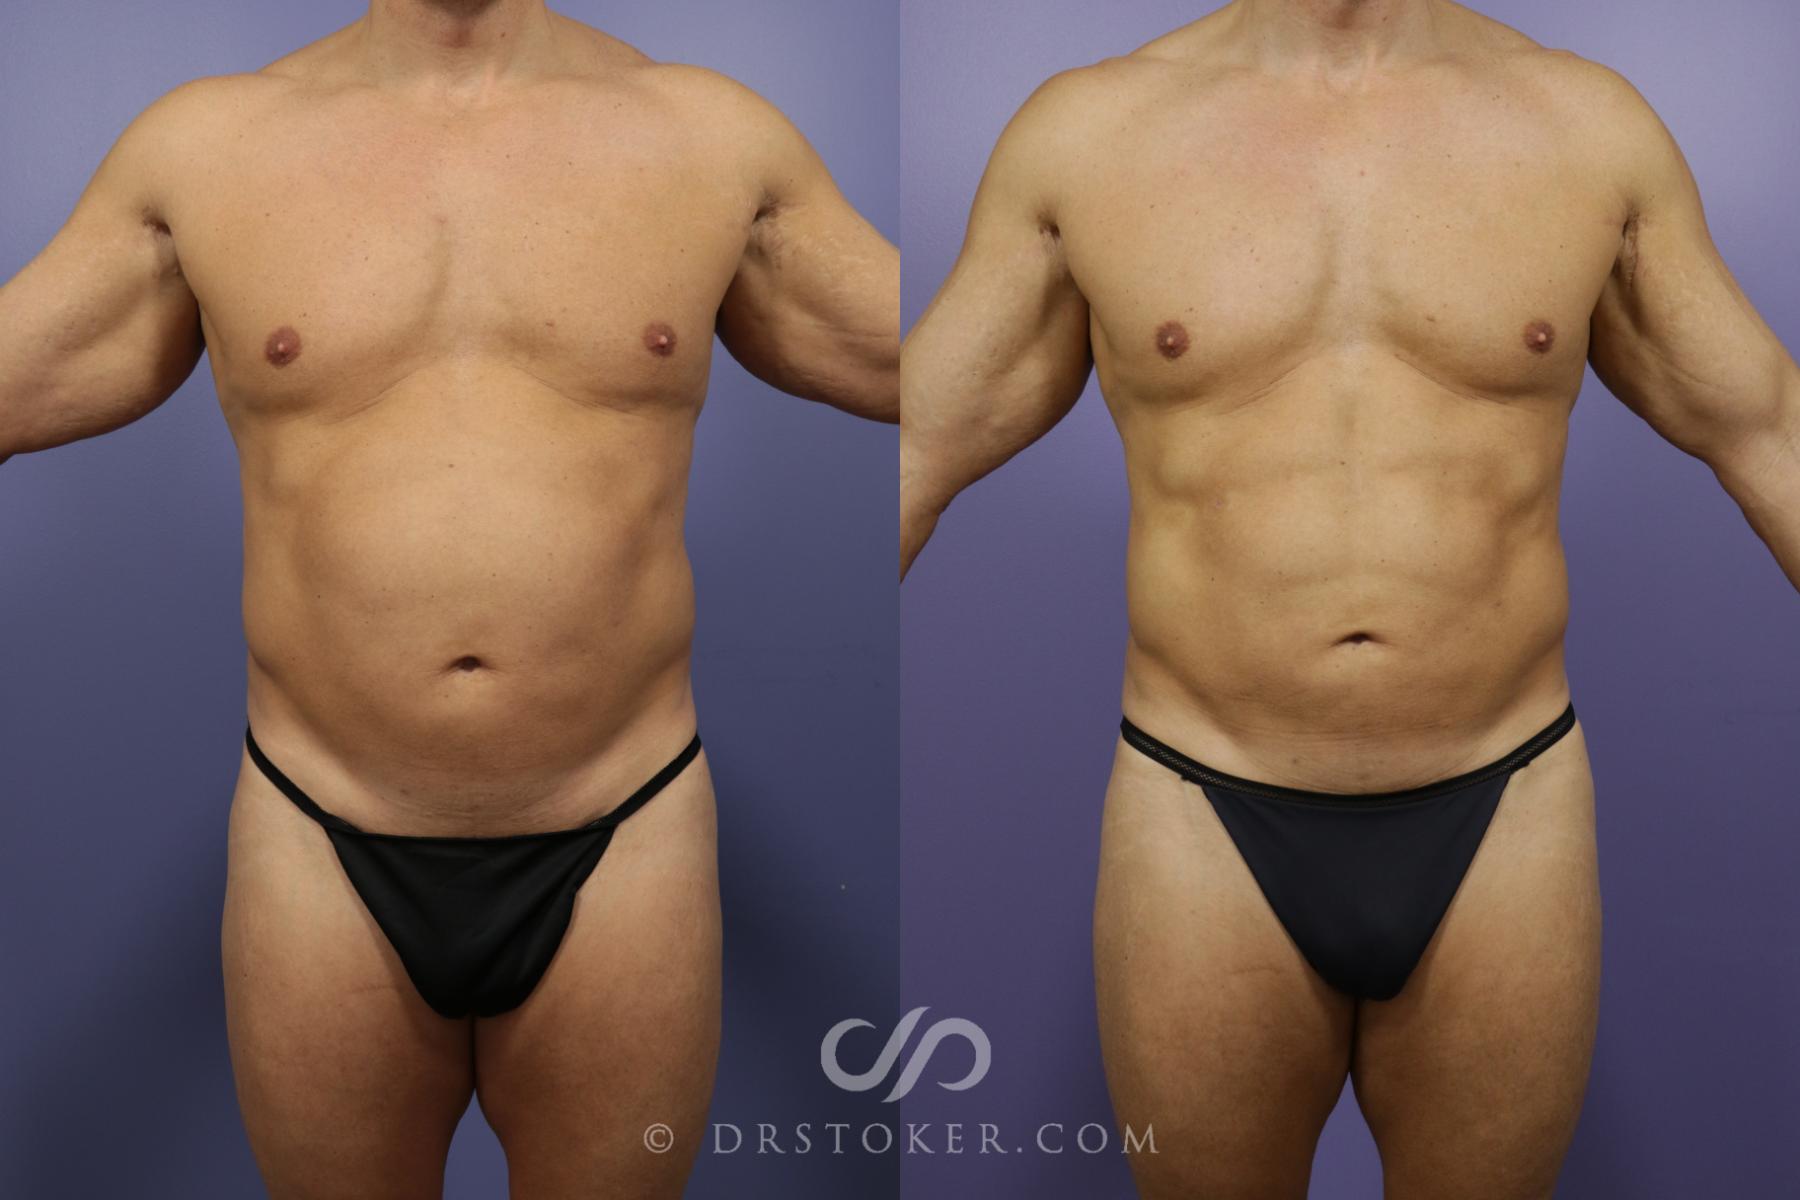 Liposuction - Abdominal Etching & Sculpting Before and After Pictures Case  974, Los Angeles, CA